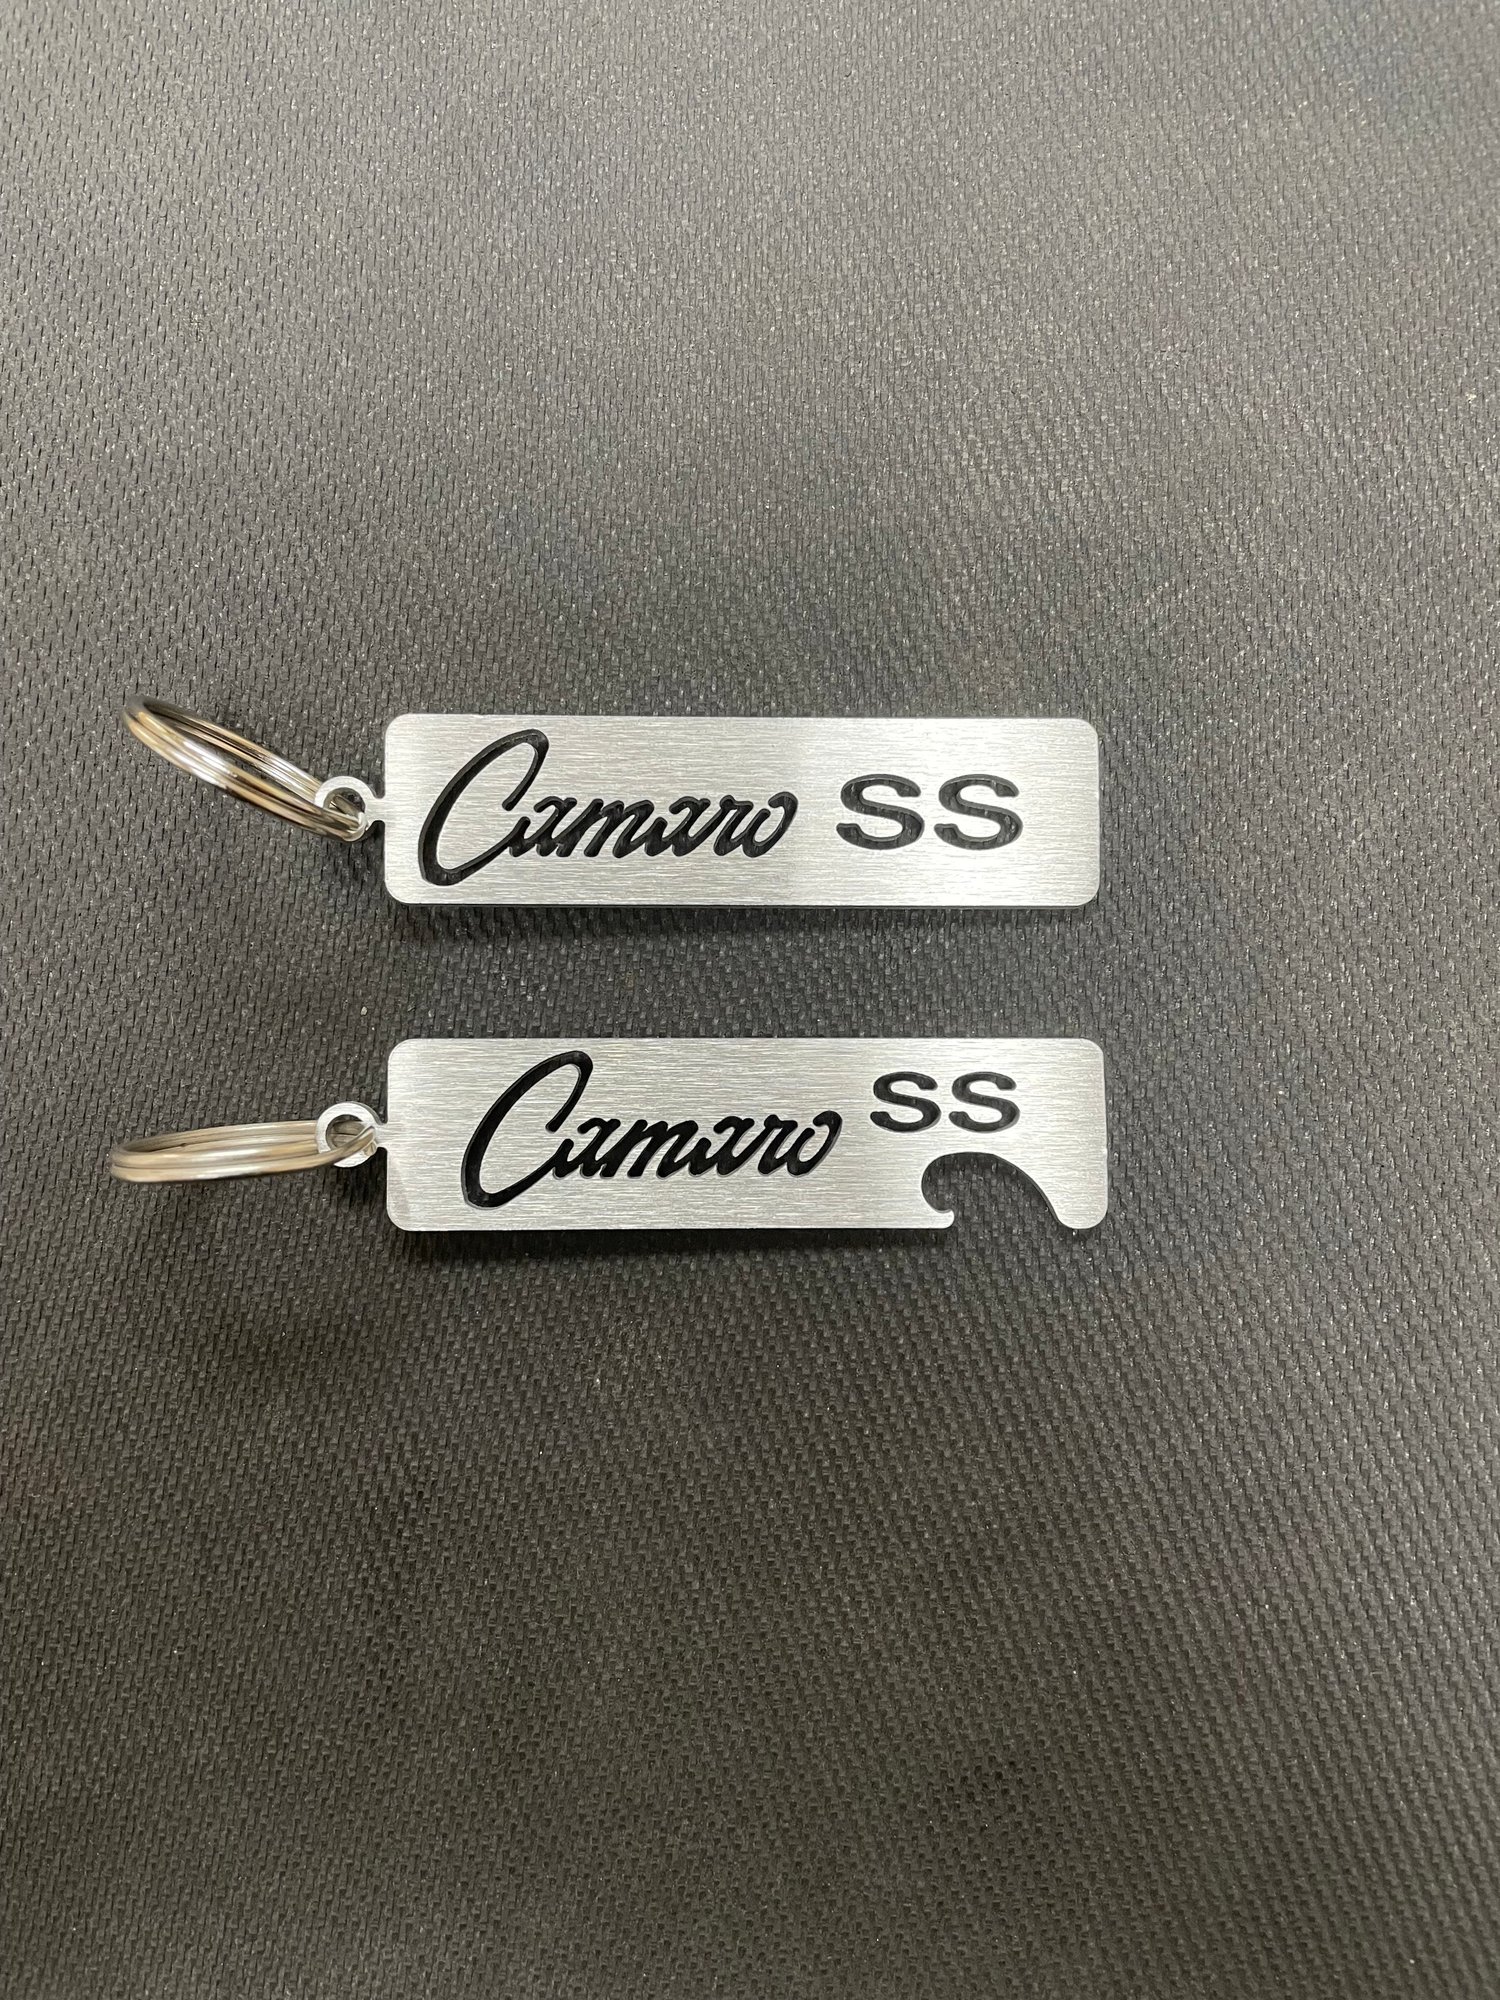 For Camaro SS enthusiasts 